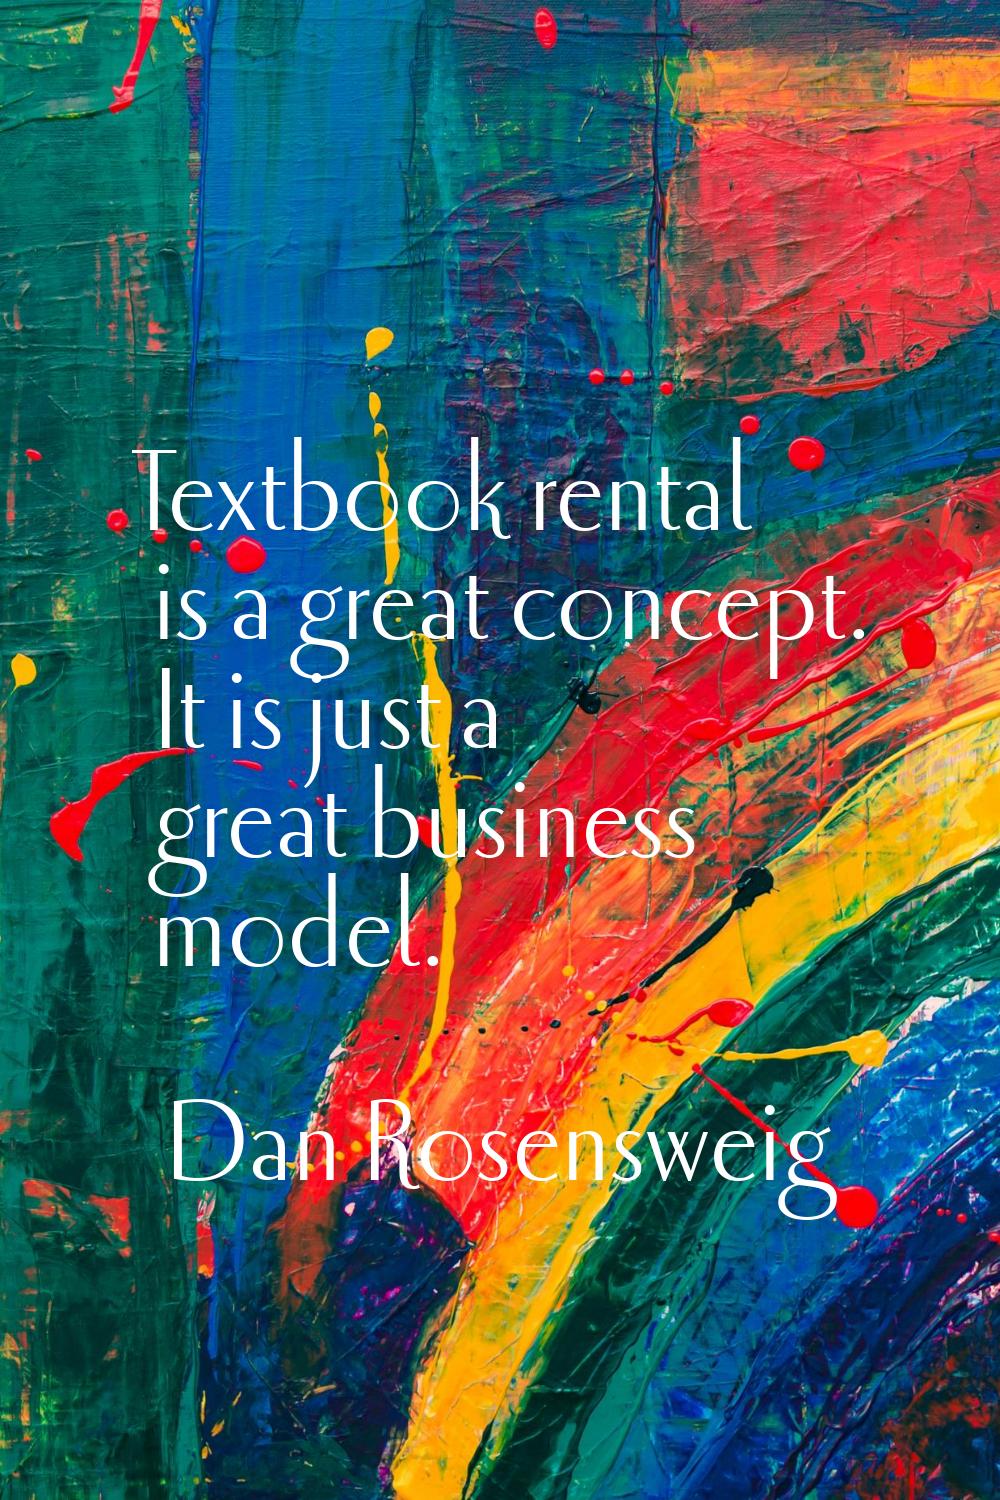 Textbook rental is a great concept. It is just a great business model.